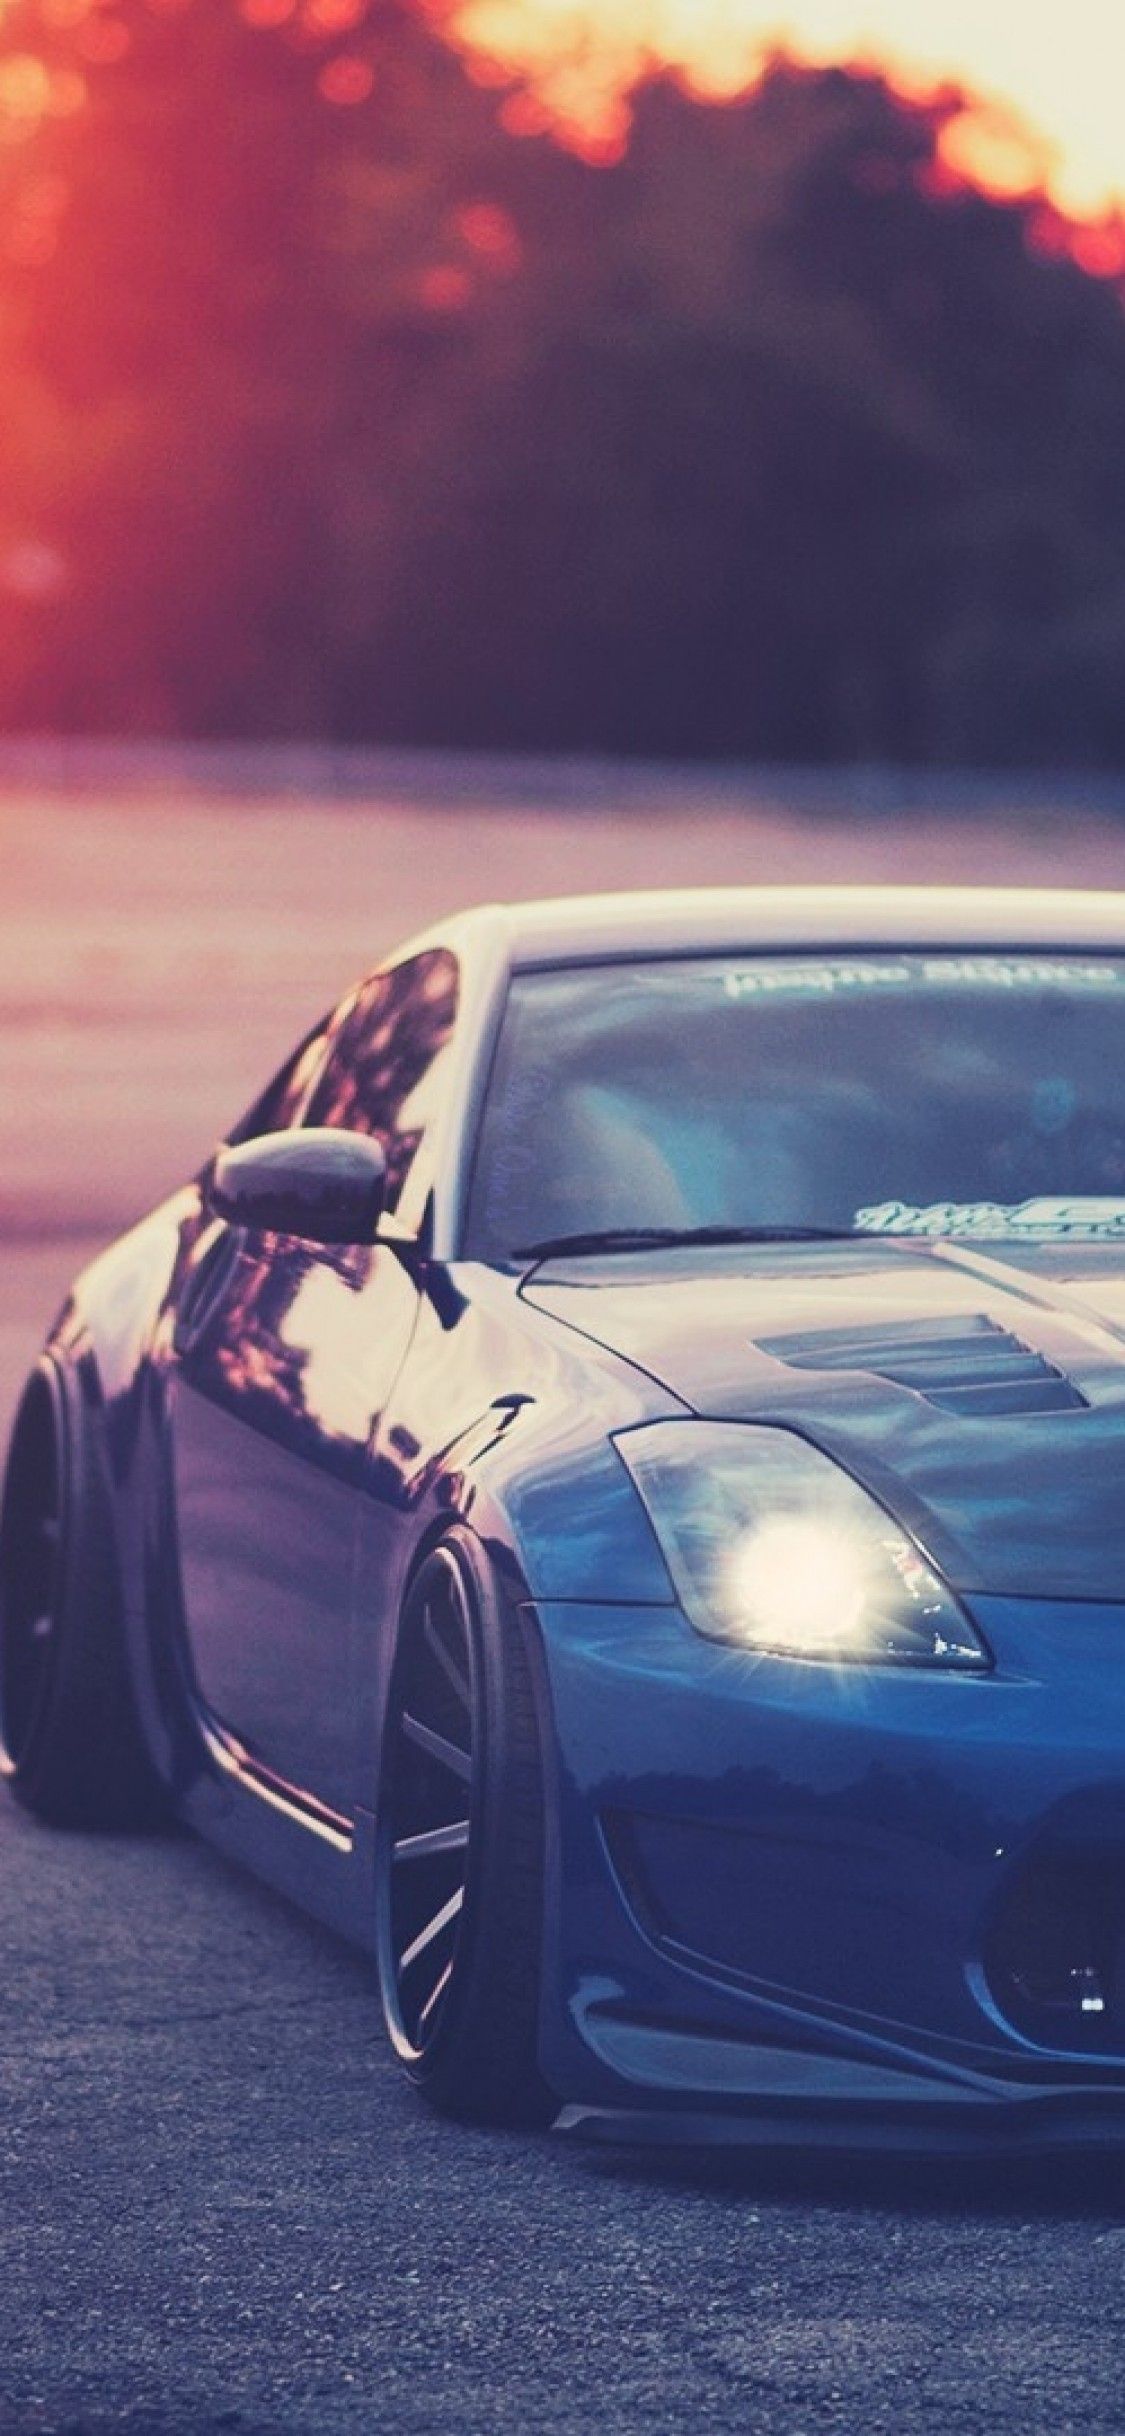 Download 1125x2436 Nissan 350z, Blue, Sunlight, Tuning, Cars